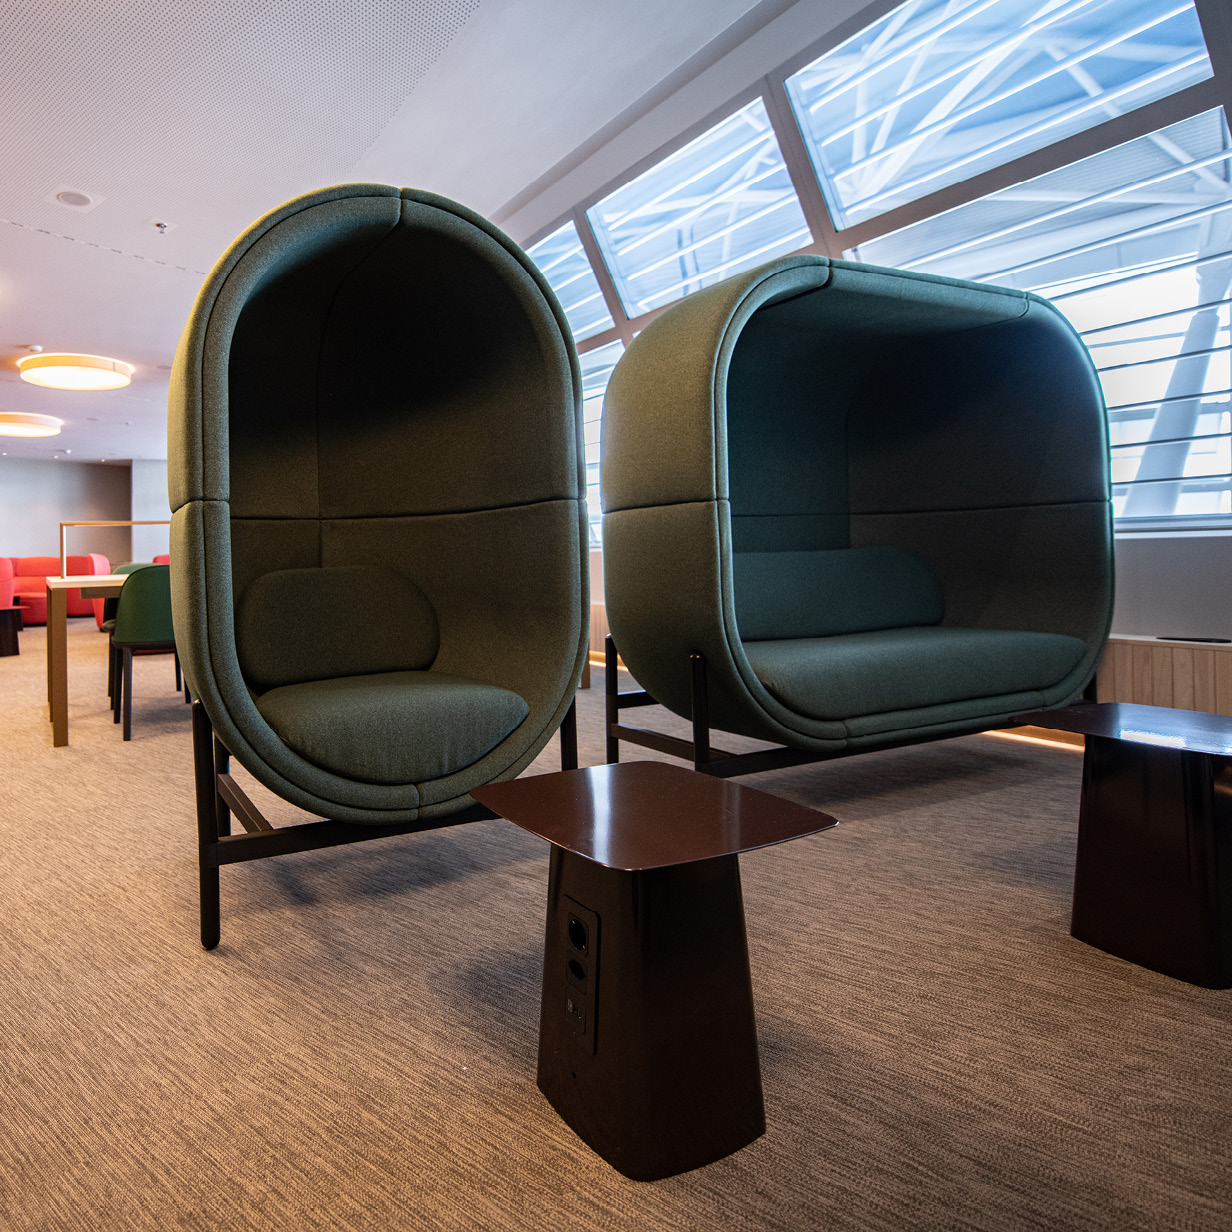 Zurich Airport Lounge, , large